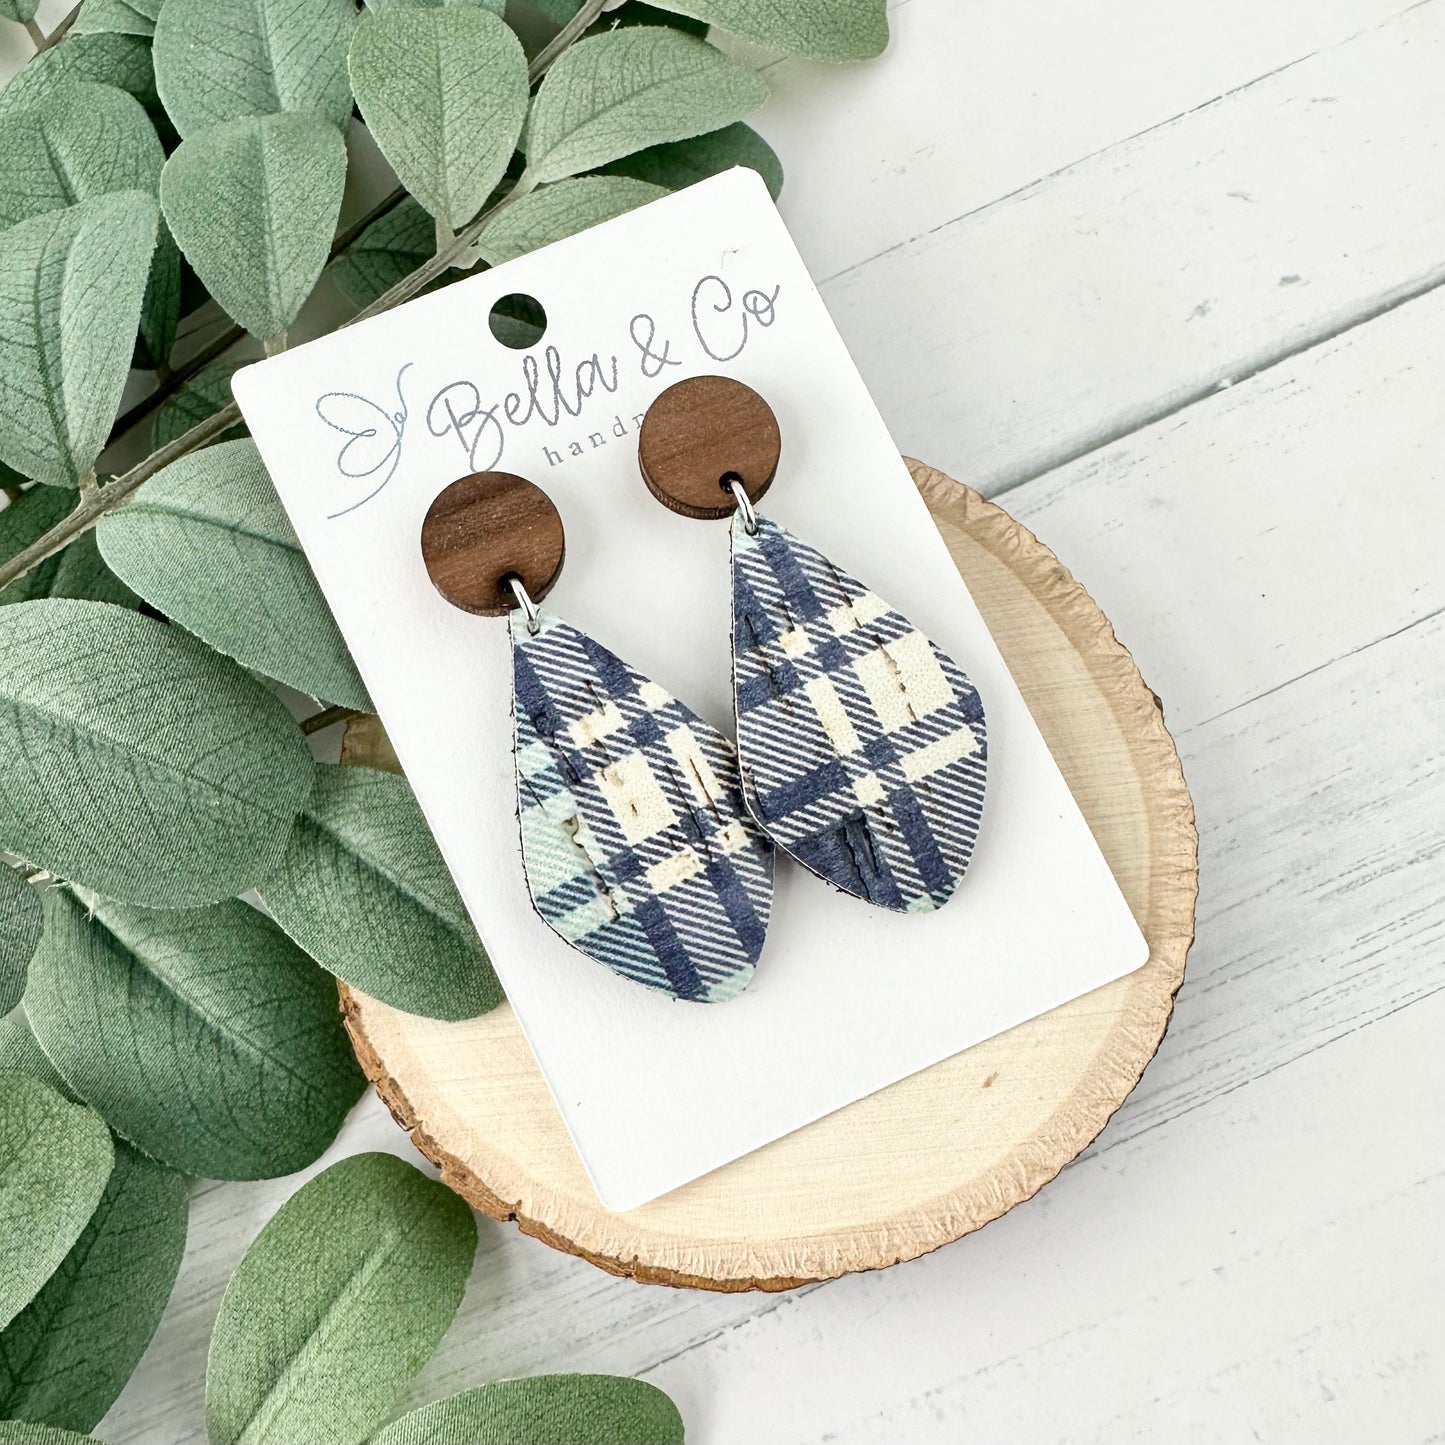 leather earrings, wood earrings, plaid earrings, nickel free, lightweight dangle earrings, valentines day gift for her, galentines day gifts